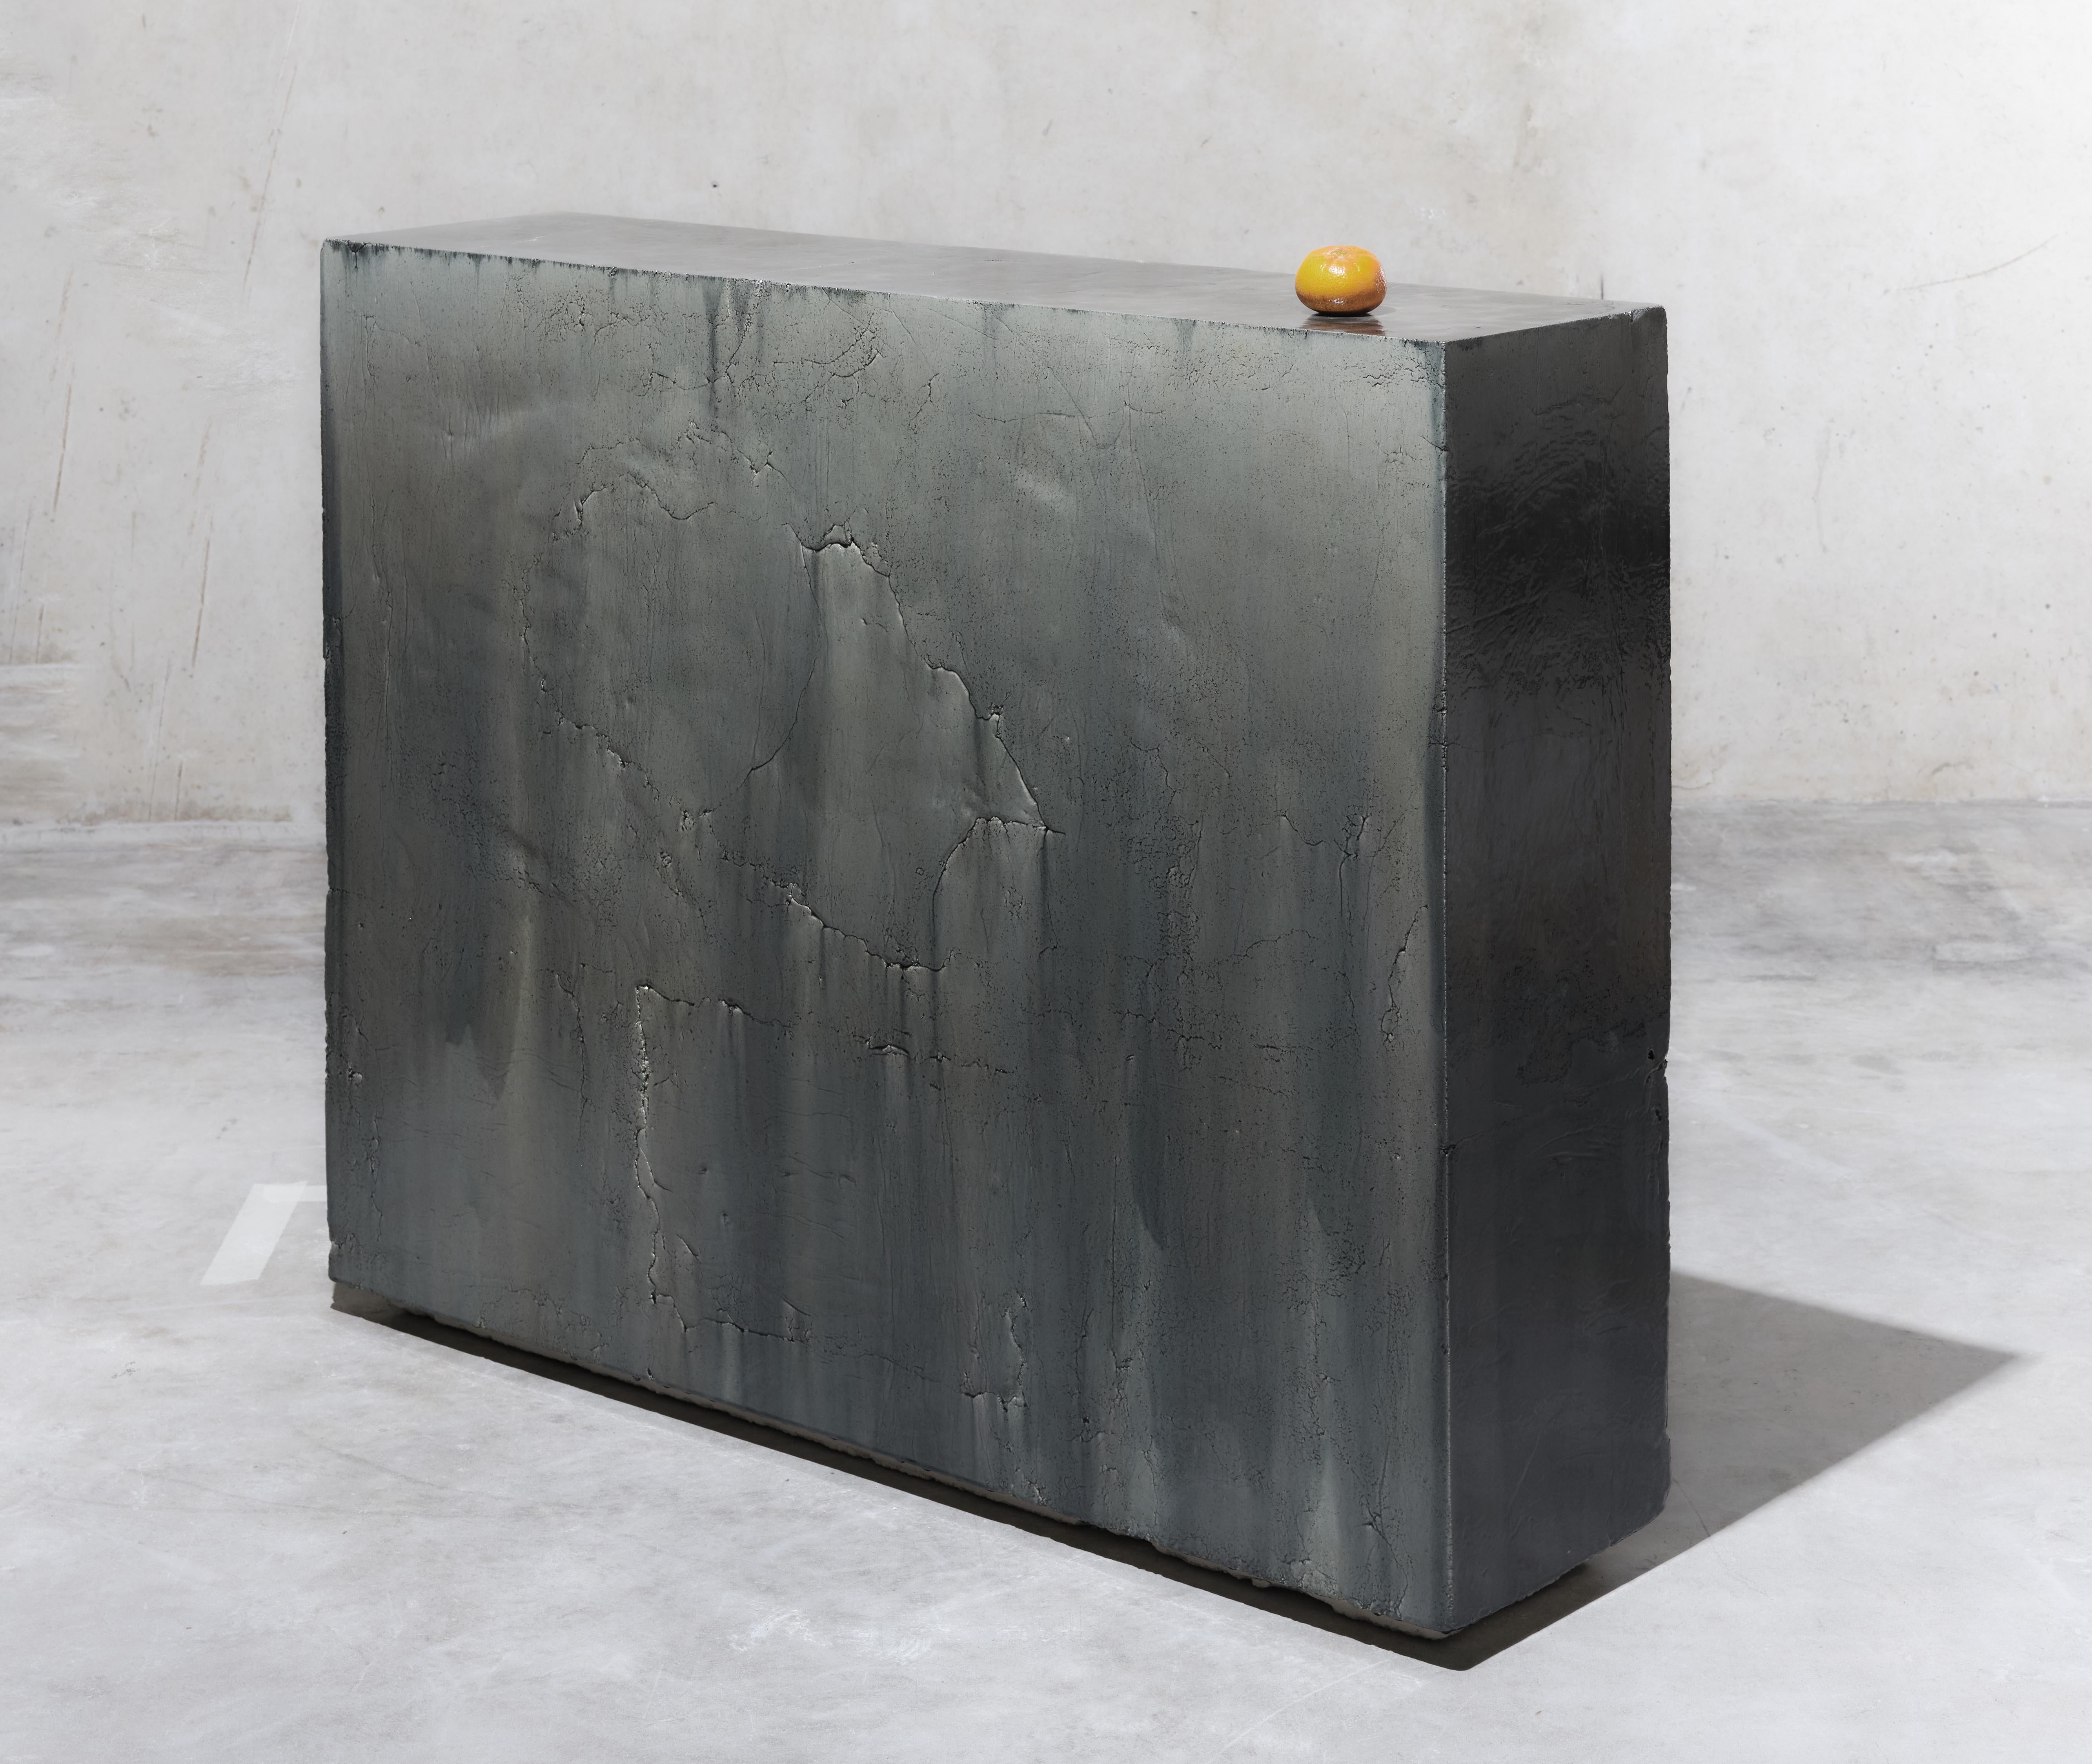 Contemporary Ceramic Modern, Iron Oxide, Manganesse Sfumato with Lead L.A 97 For Sale 1